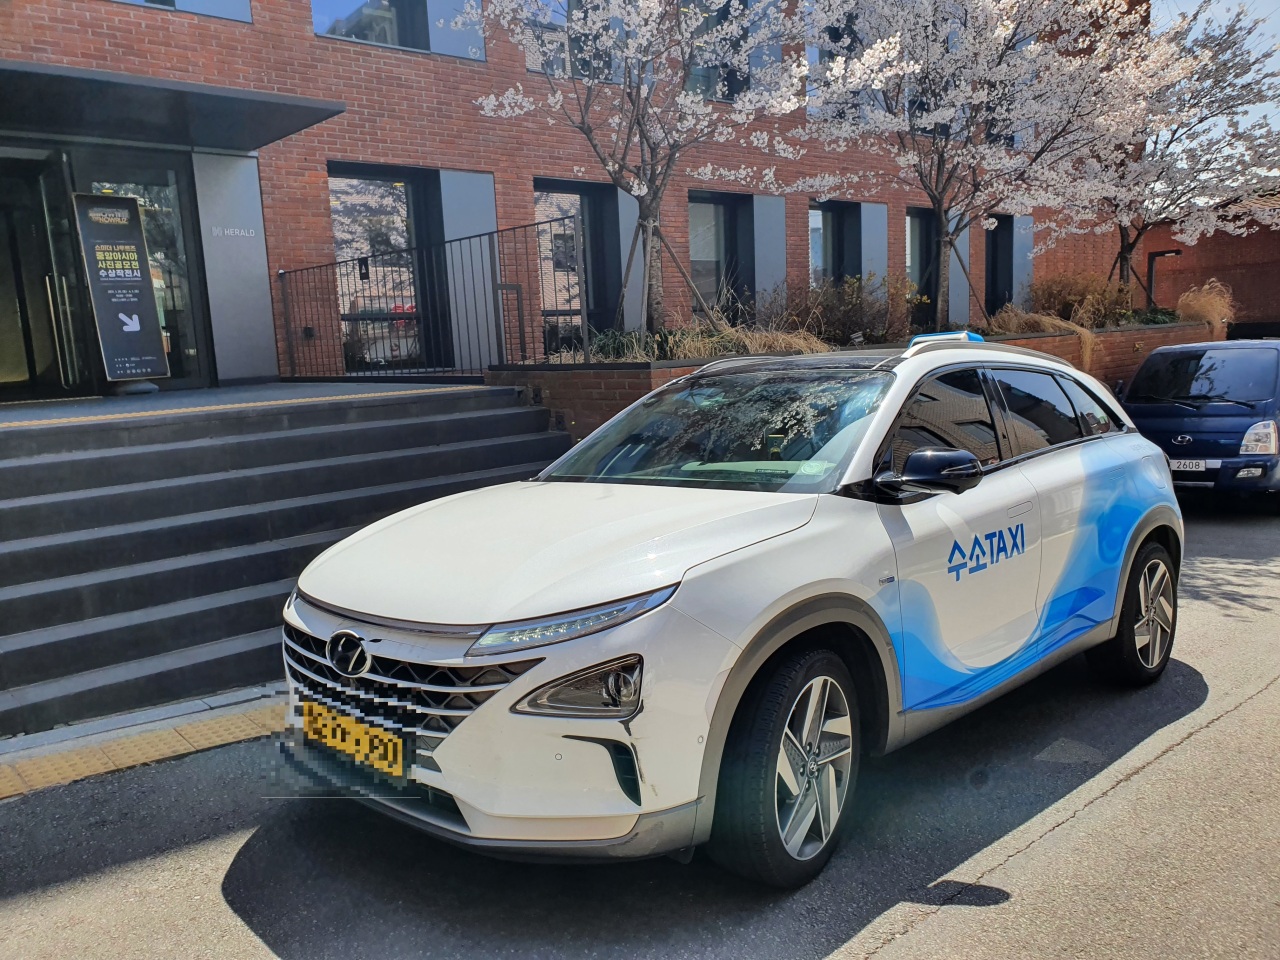 A hydrogen taxi is parked at The Korea Herald headquarters in Yongsan-gu, central Seoul, last Wednesday. (Kim Byung-wook/The Korea Herald)